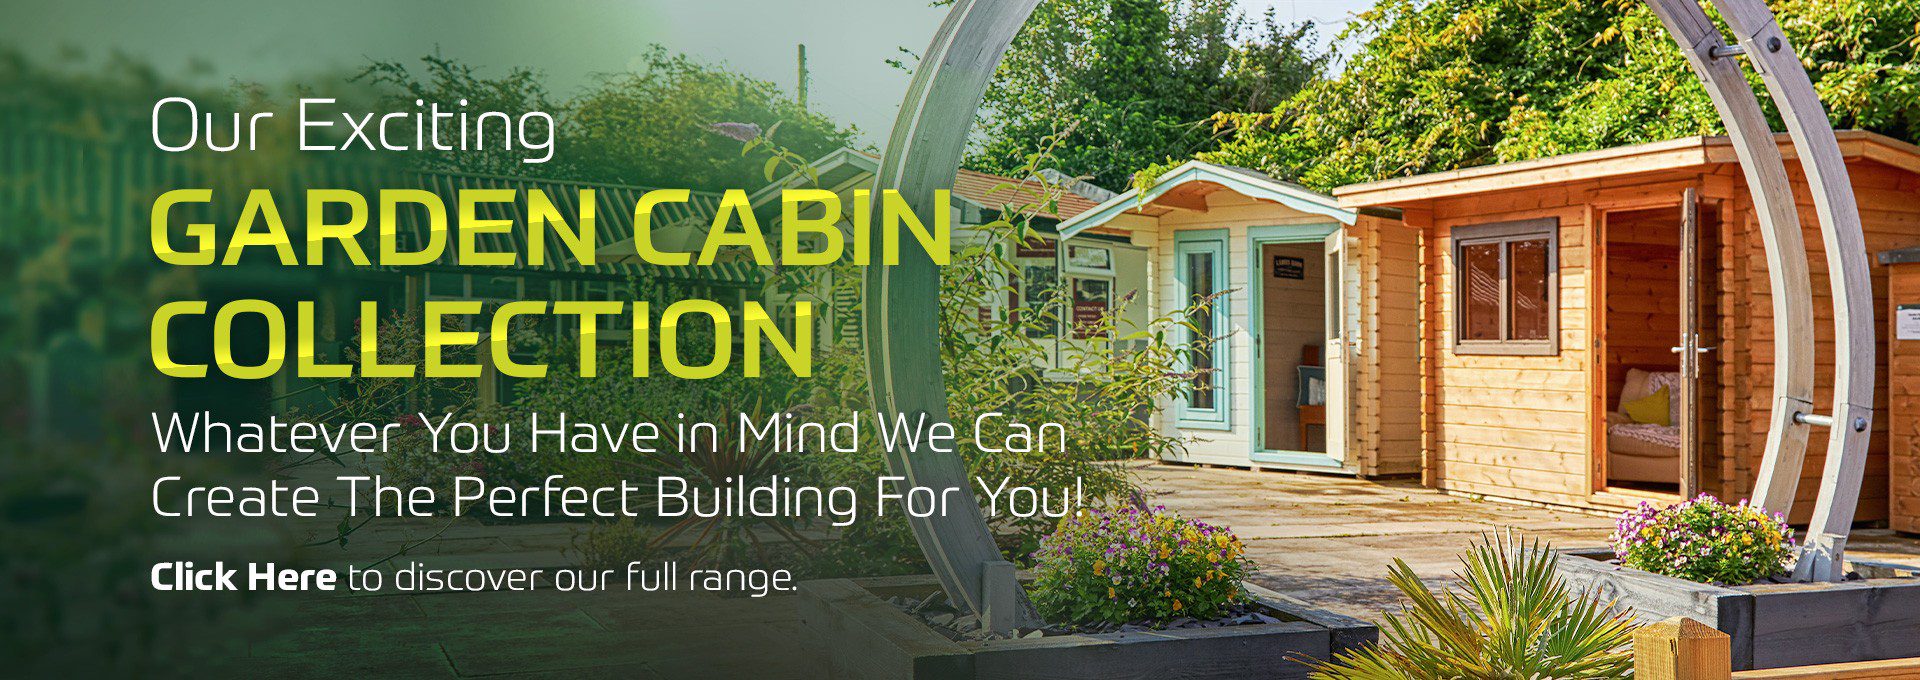 Our Exciting Garden Cabin Collection - The perfect building for you!